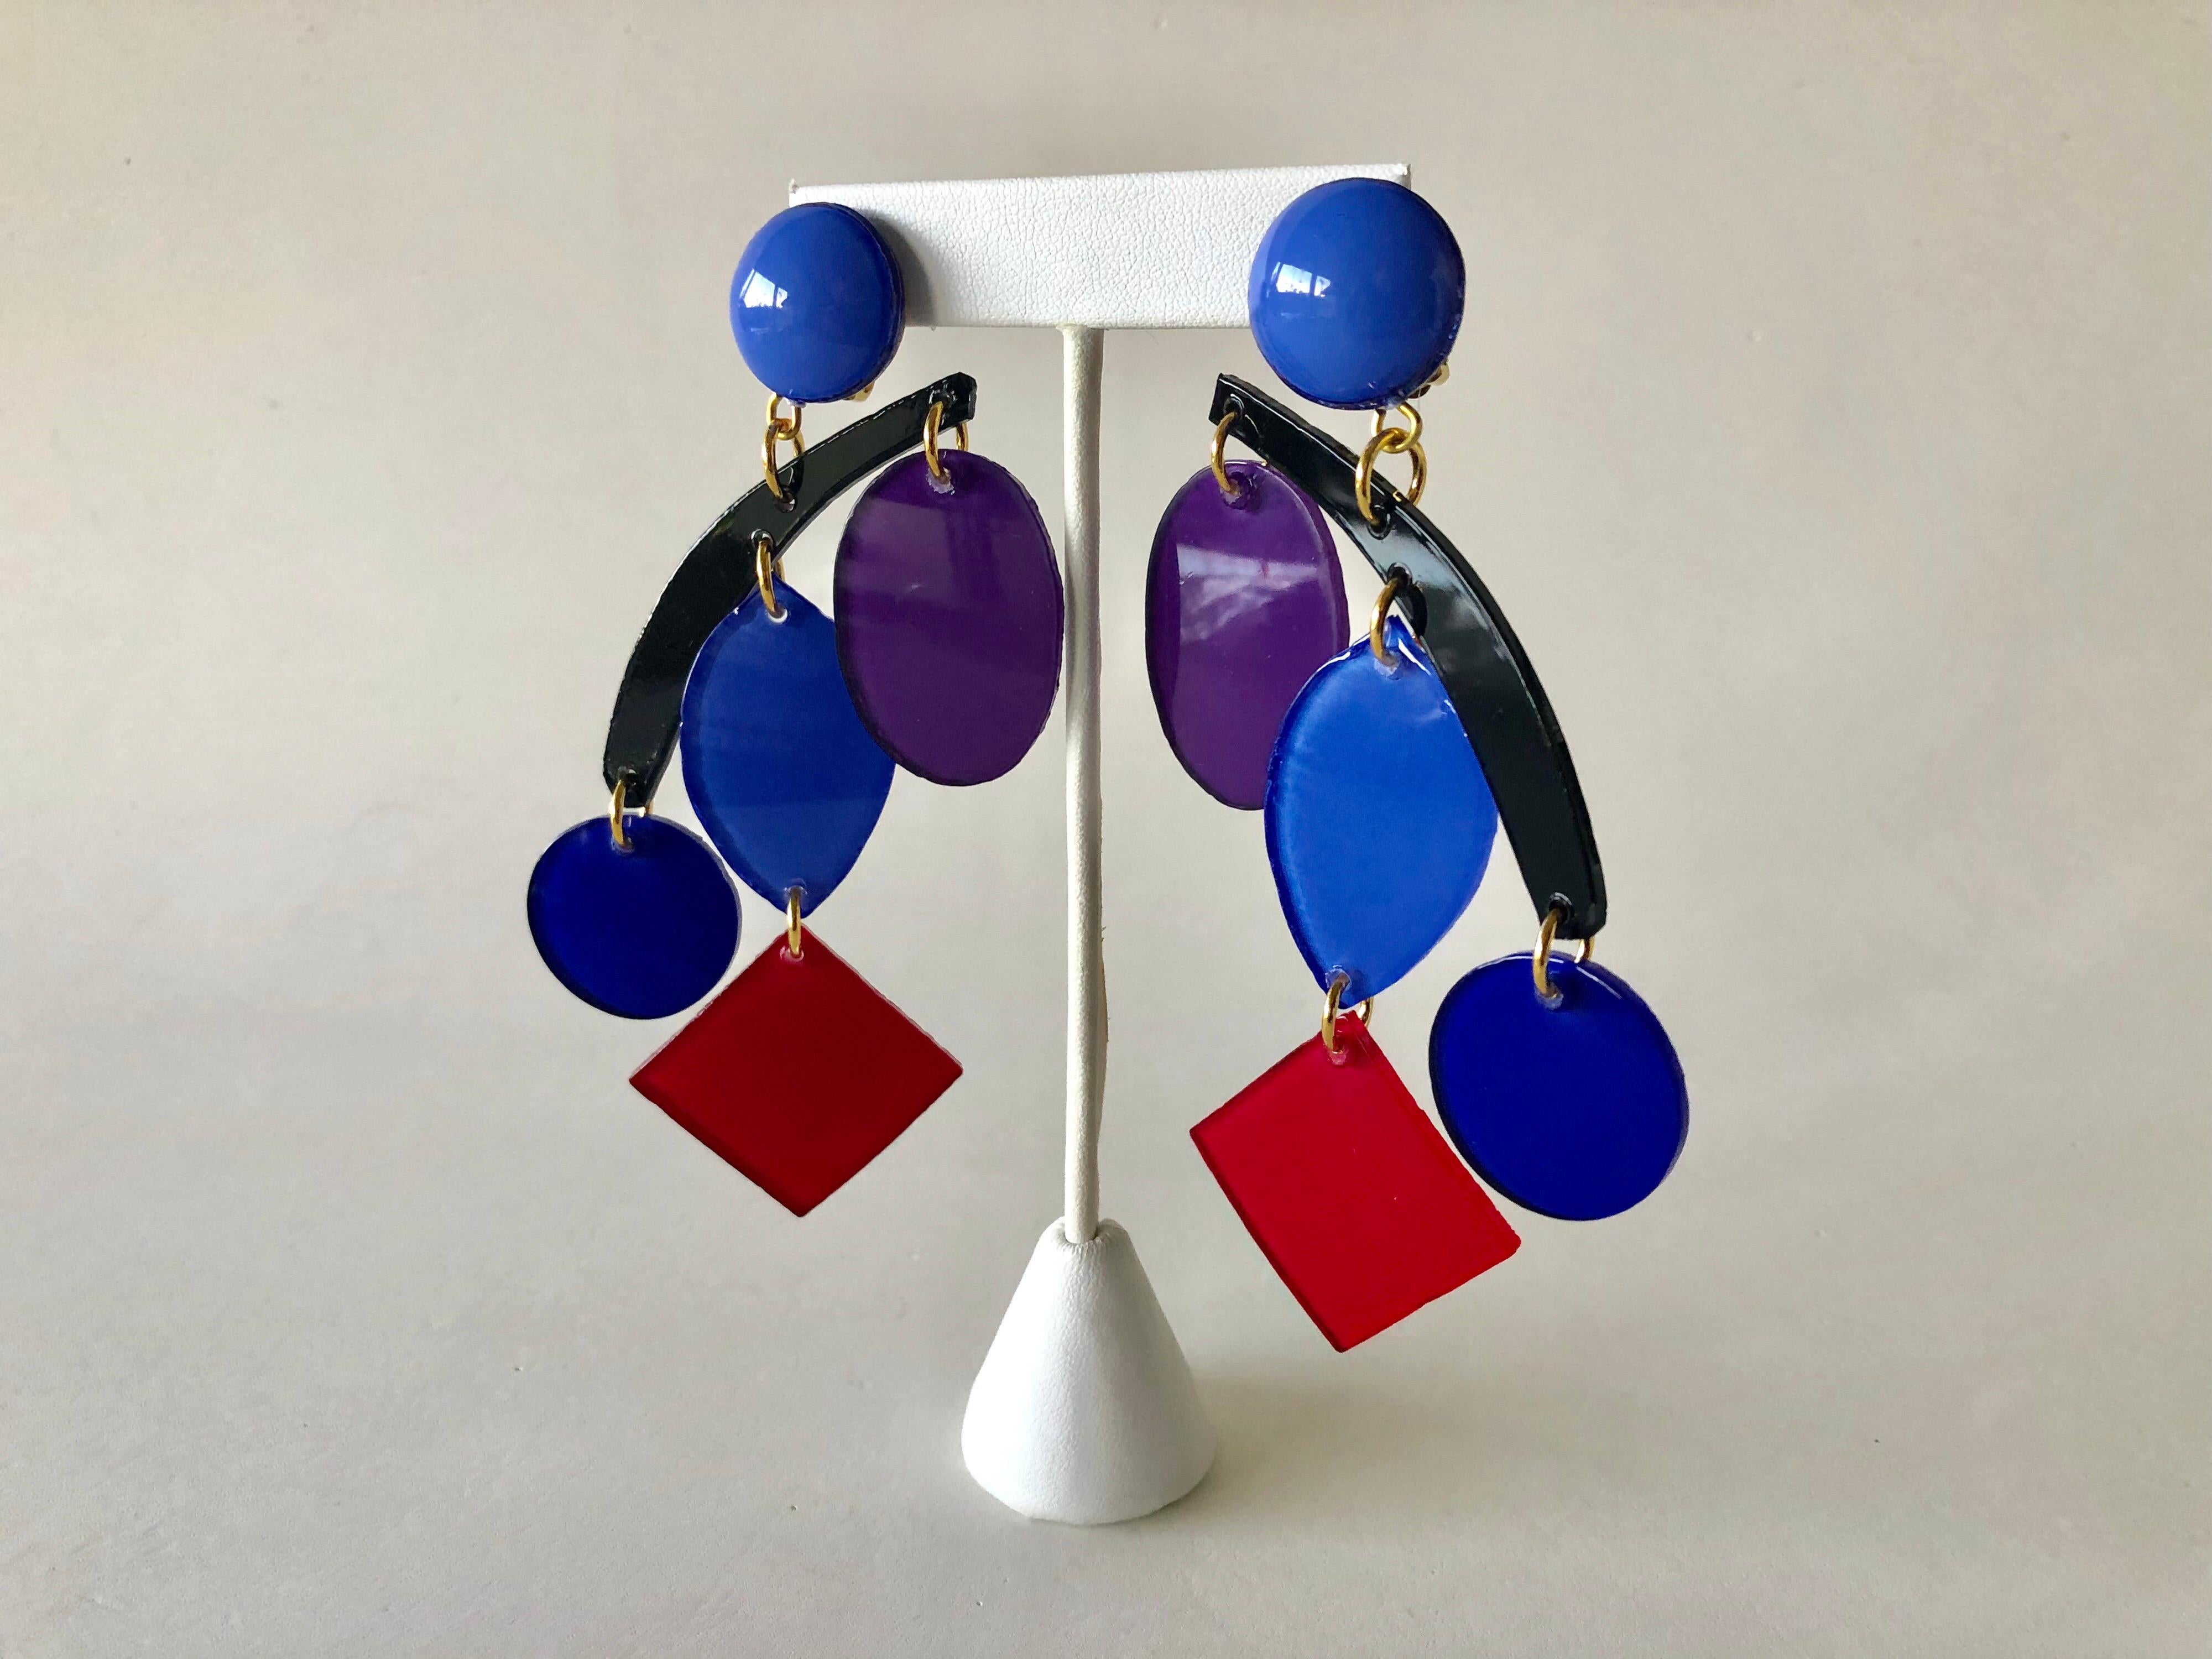 Colorful Modern Mobile Sculpture Statement Earrings  2